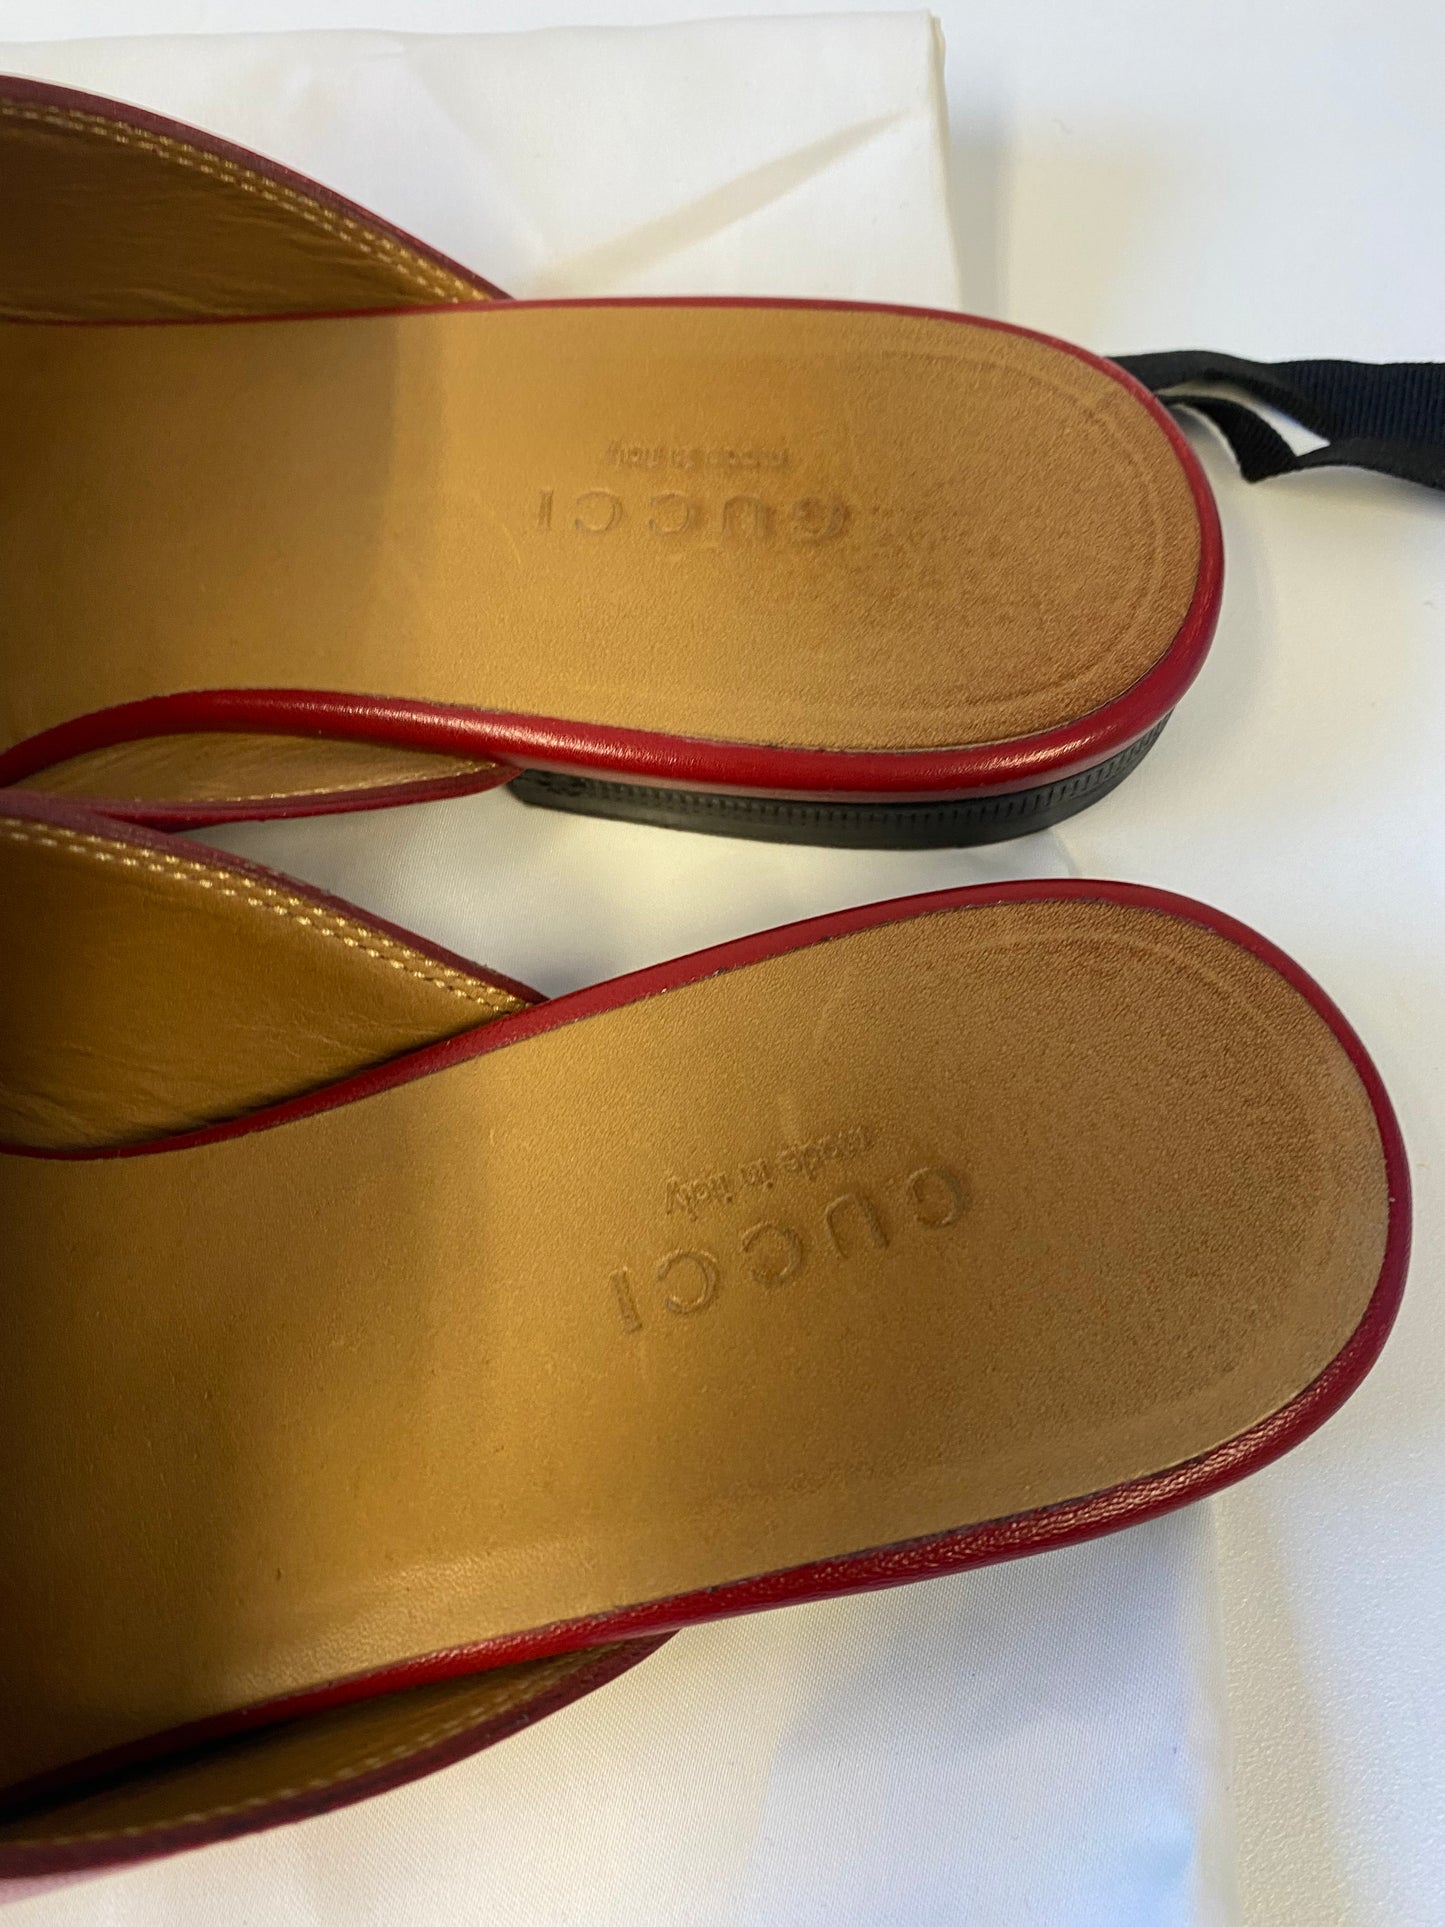 GUCCI RED LEATHER PRINCETOWN SLIPPERS / SHOES SIZE 36 UK 3